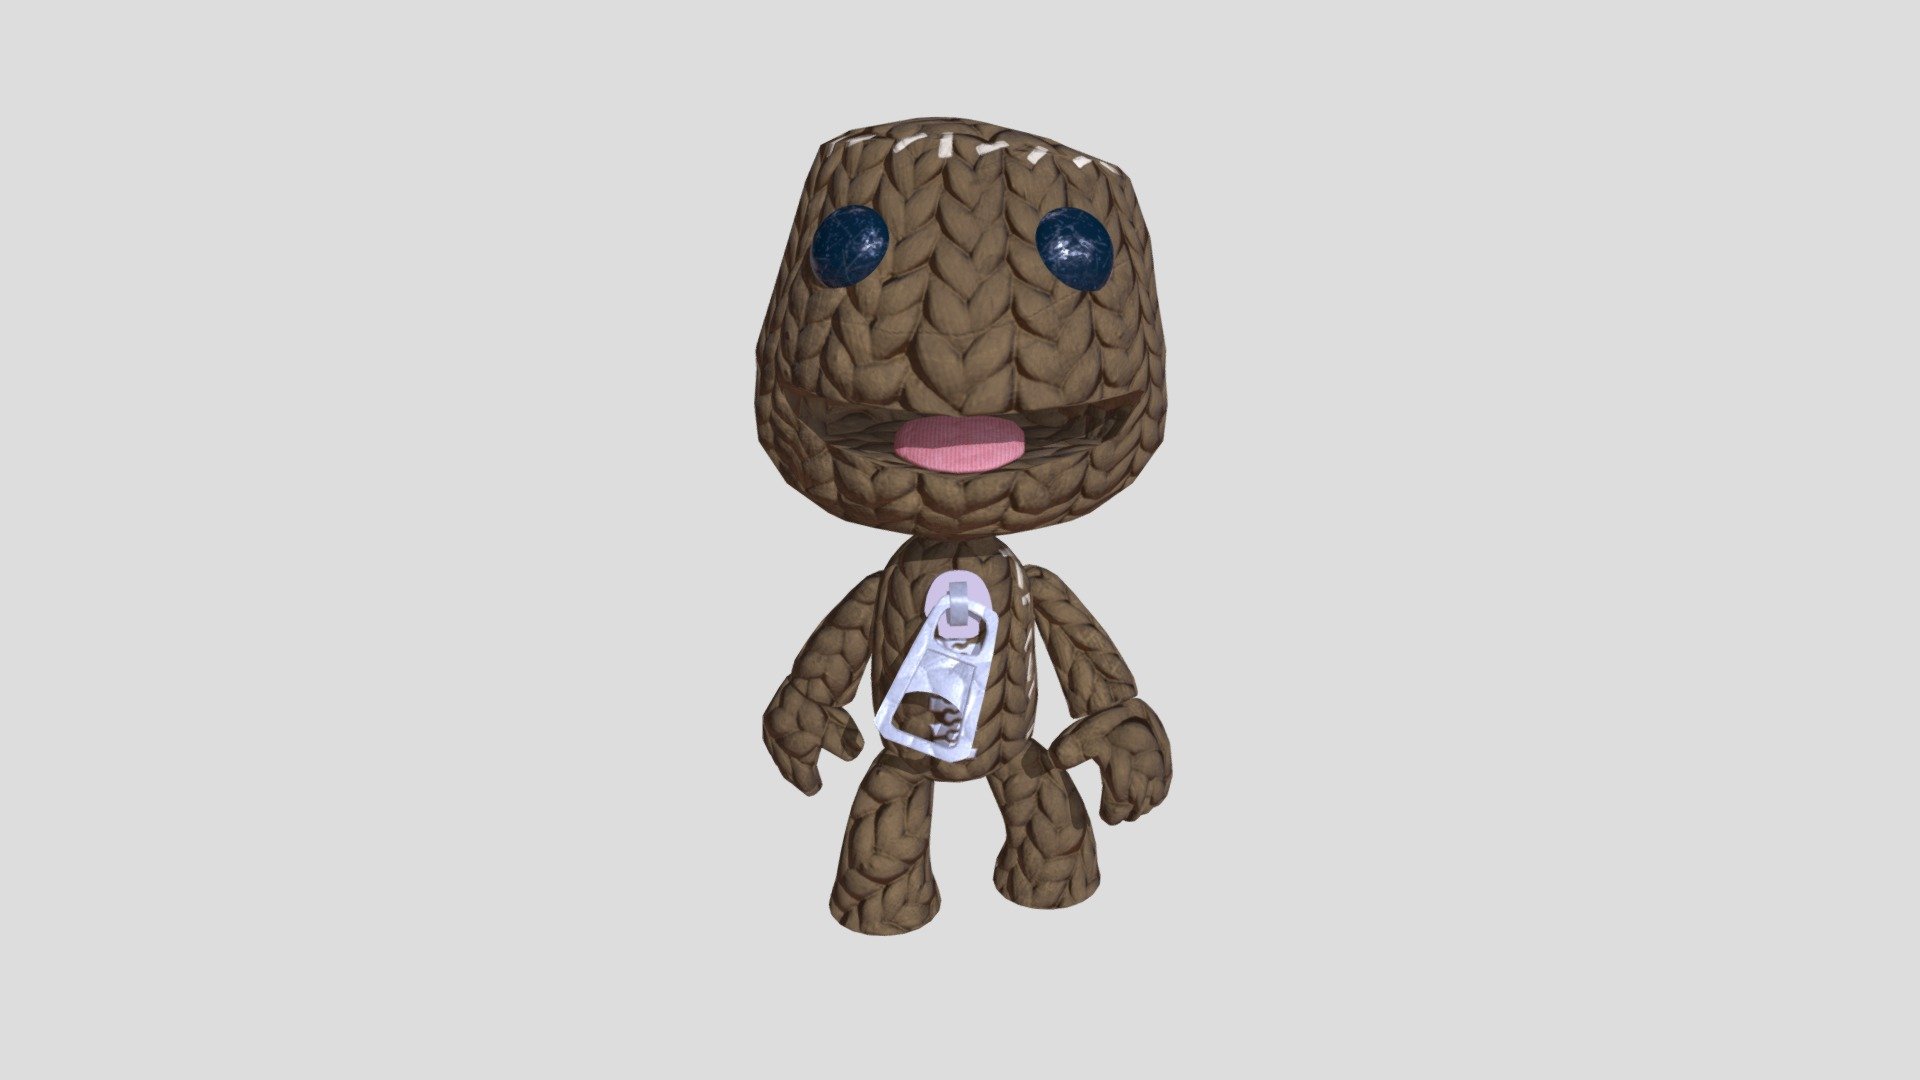 Things to consider for updated version
-Where did my zipper base UV go??
-fix mask on knitted texture (it's showing through to other materials)
-How to add stray fuzzies and threads to yarn texture? - SackBoy1.0 - 3D model by Solelynonsensically 3d model